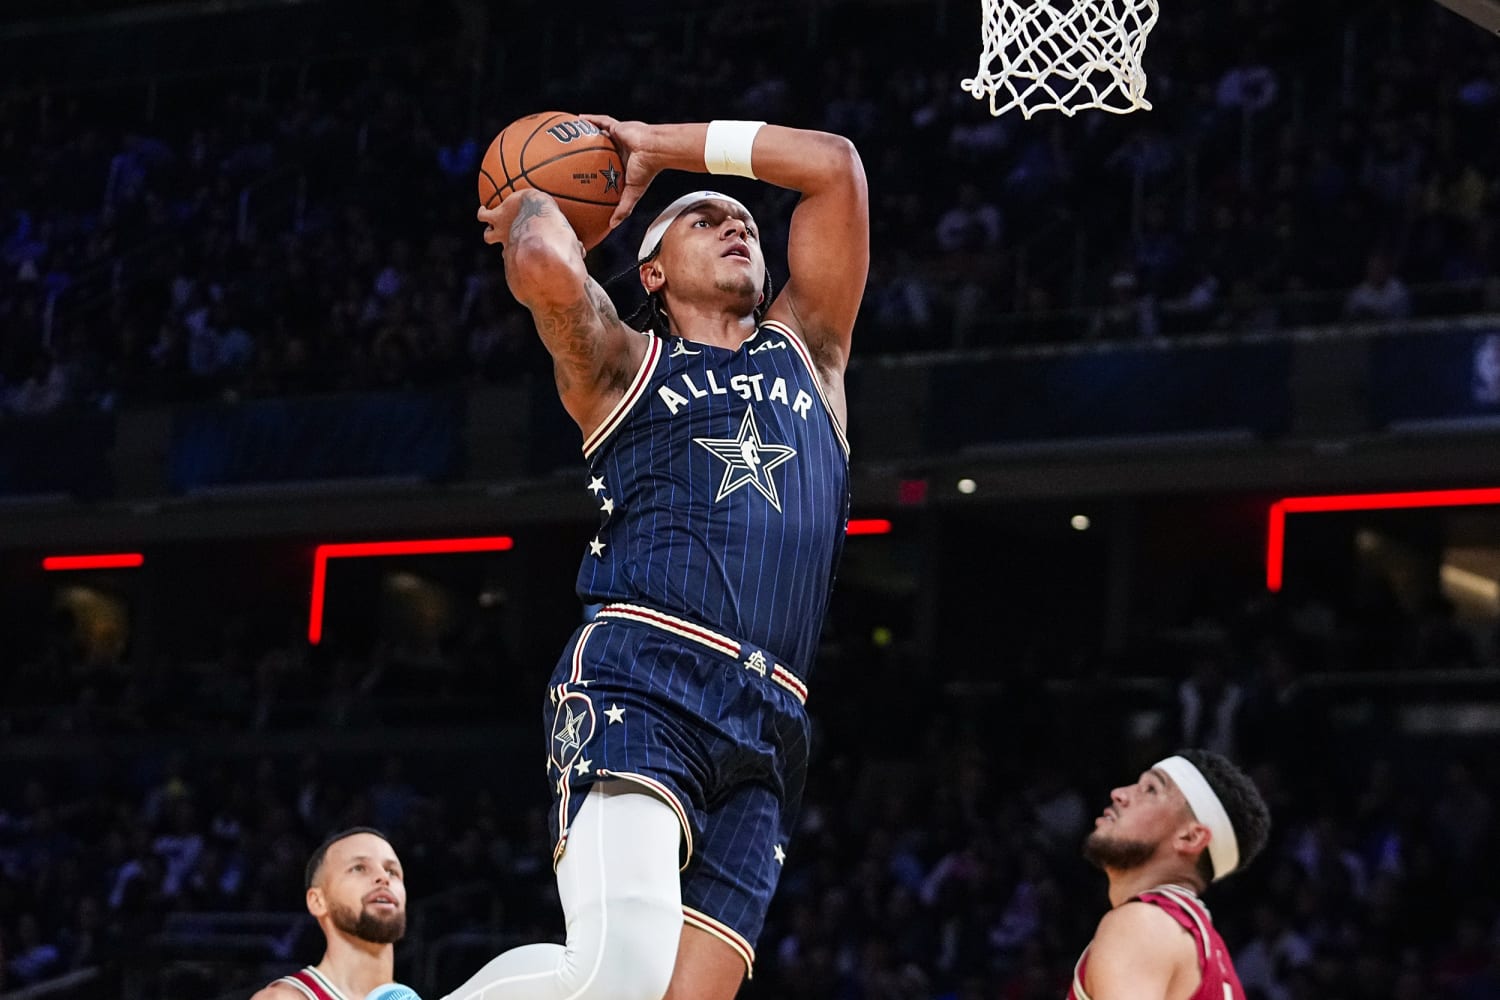 Points records fall at the All-Star Game, with the East beating the West  211-186